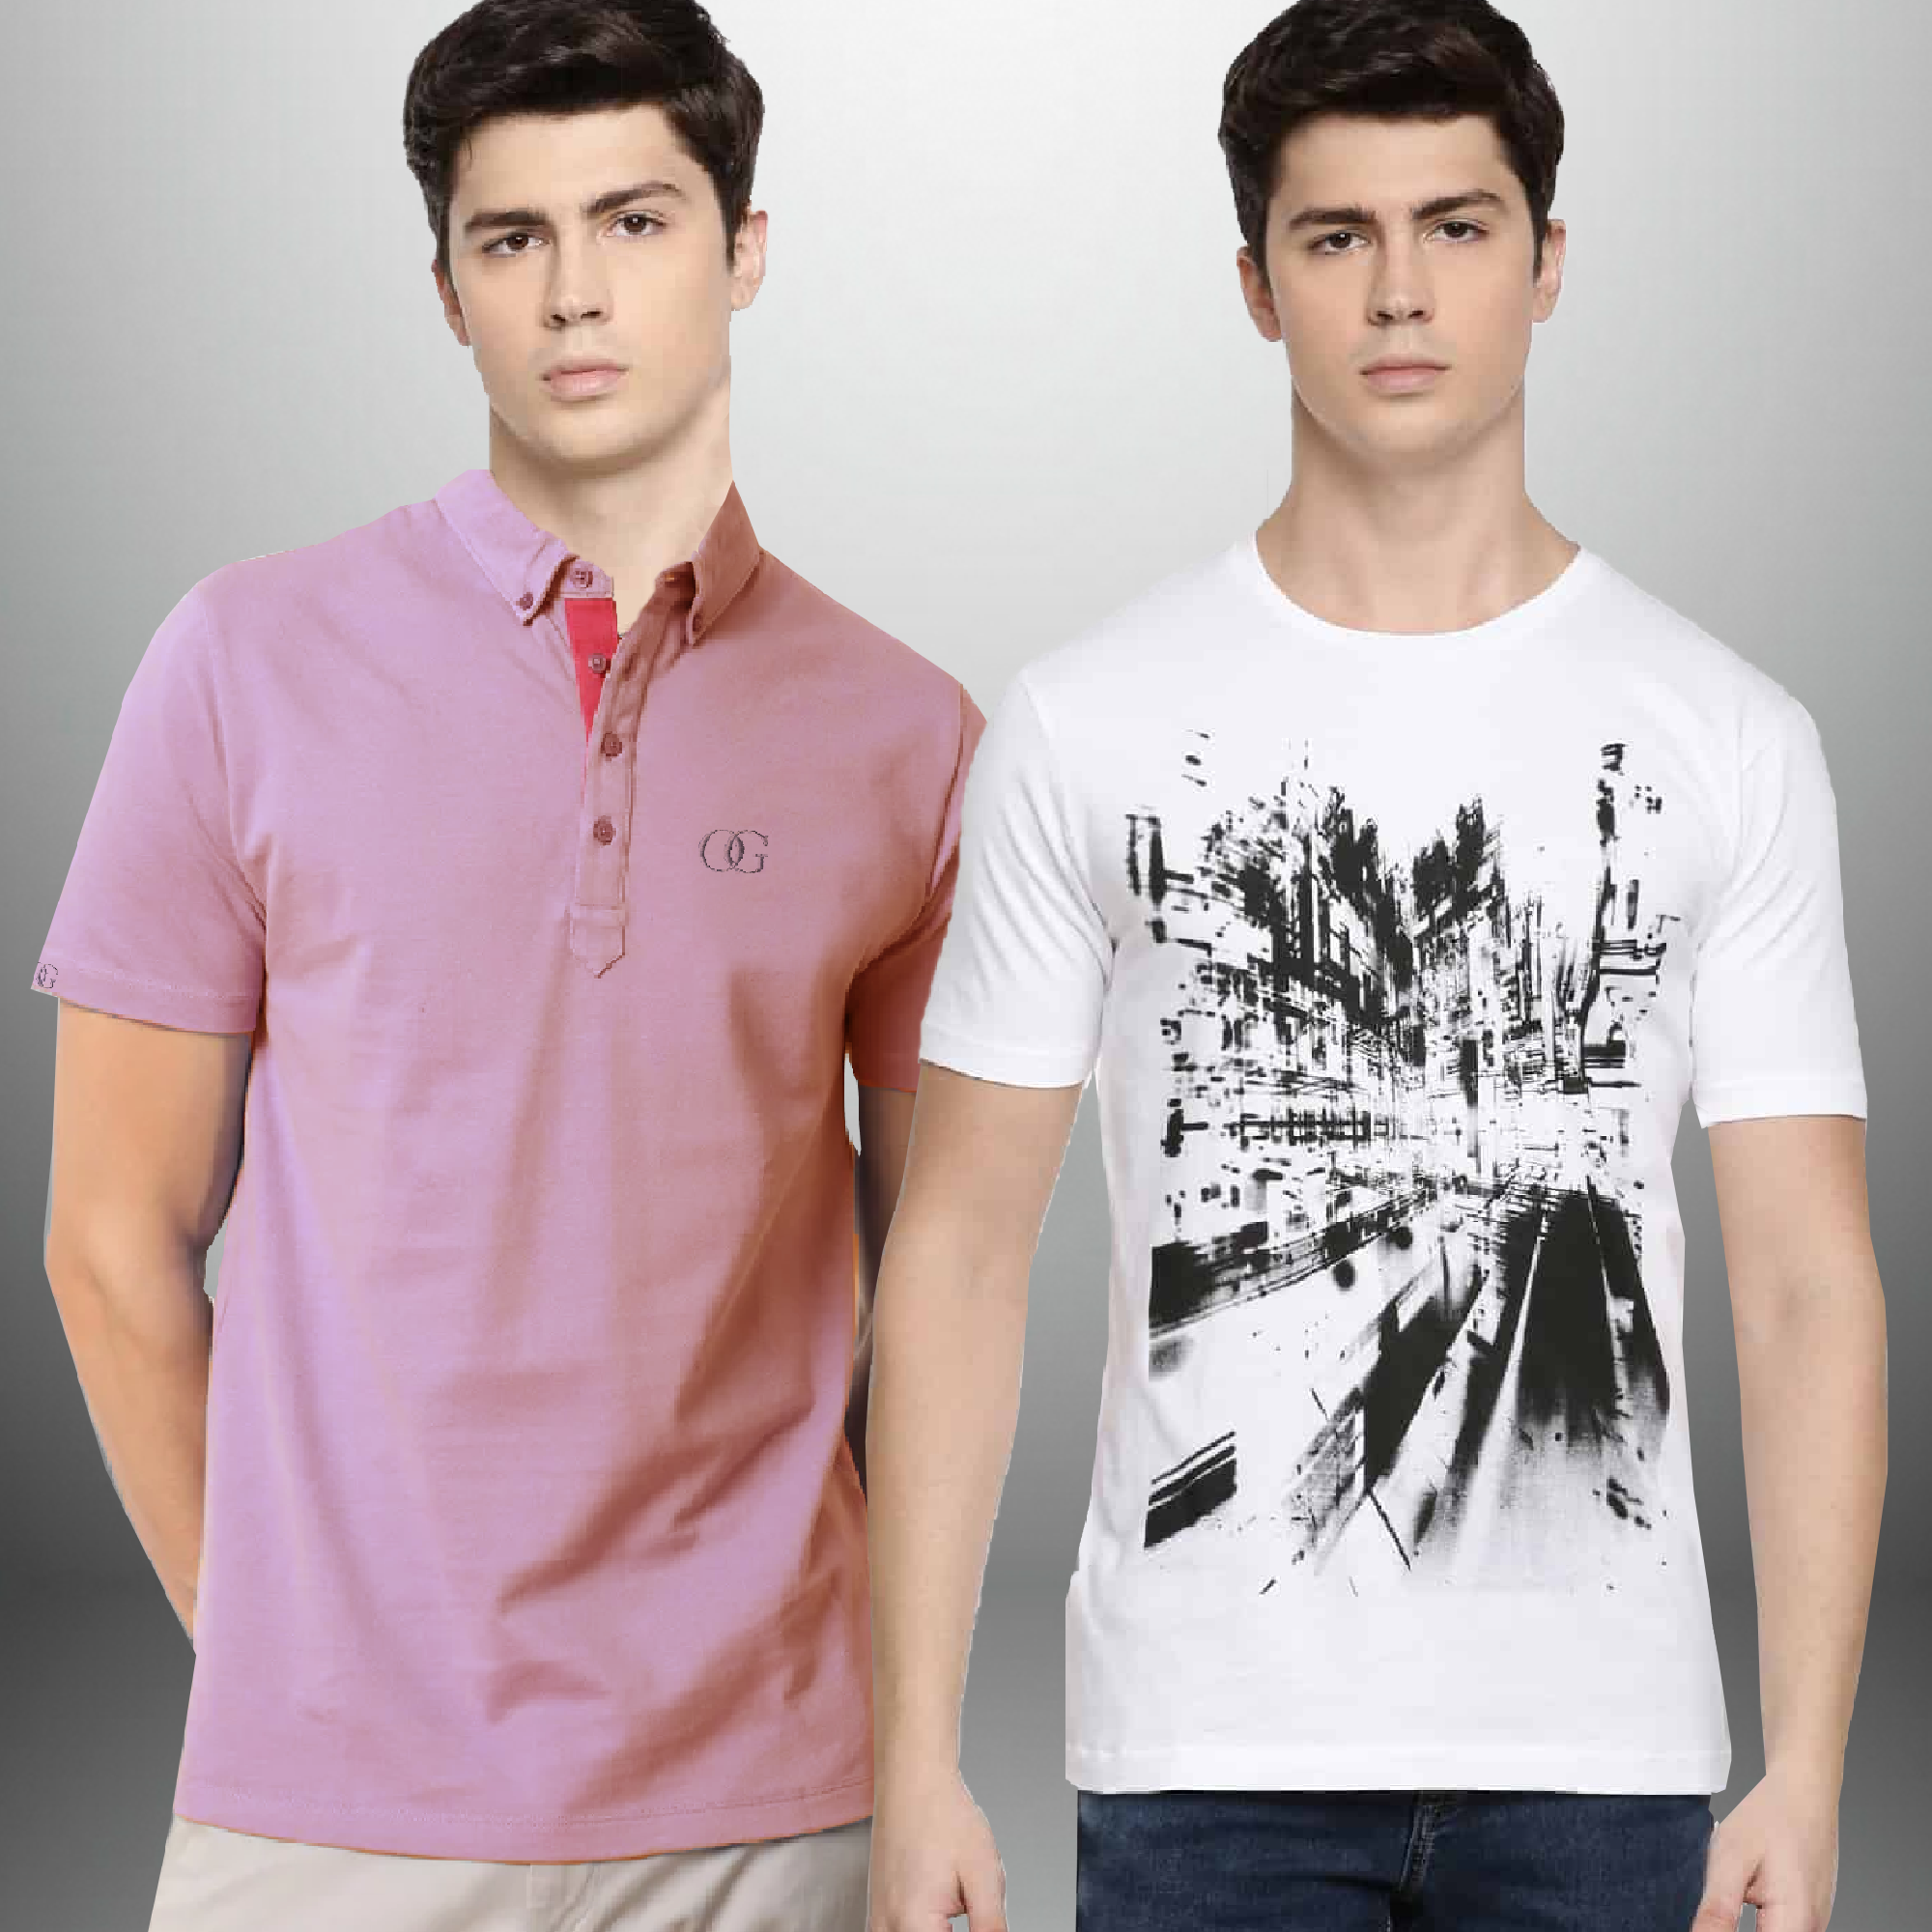 Pack of 2 Men's white printed round neck t-shirt and collared T-shirt-RKTMCO008